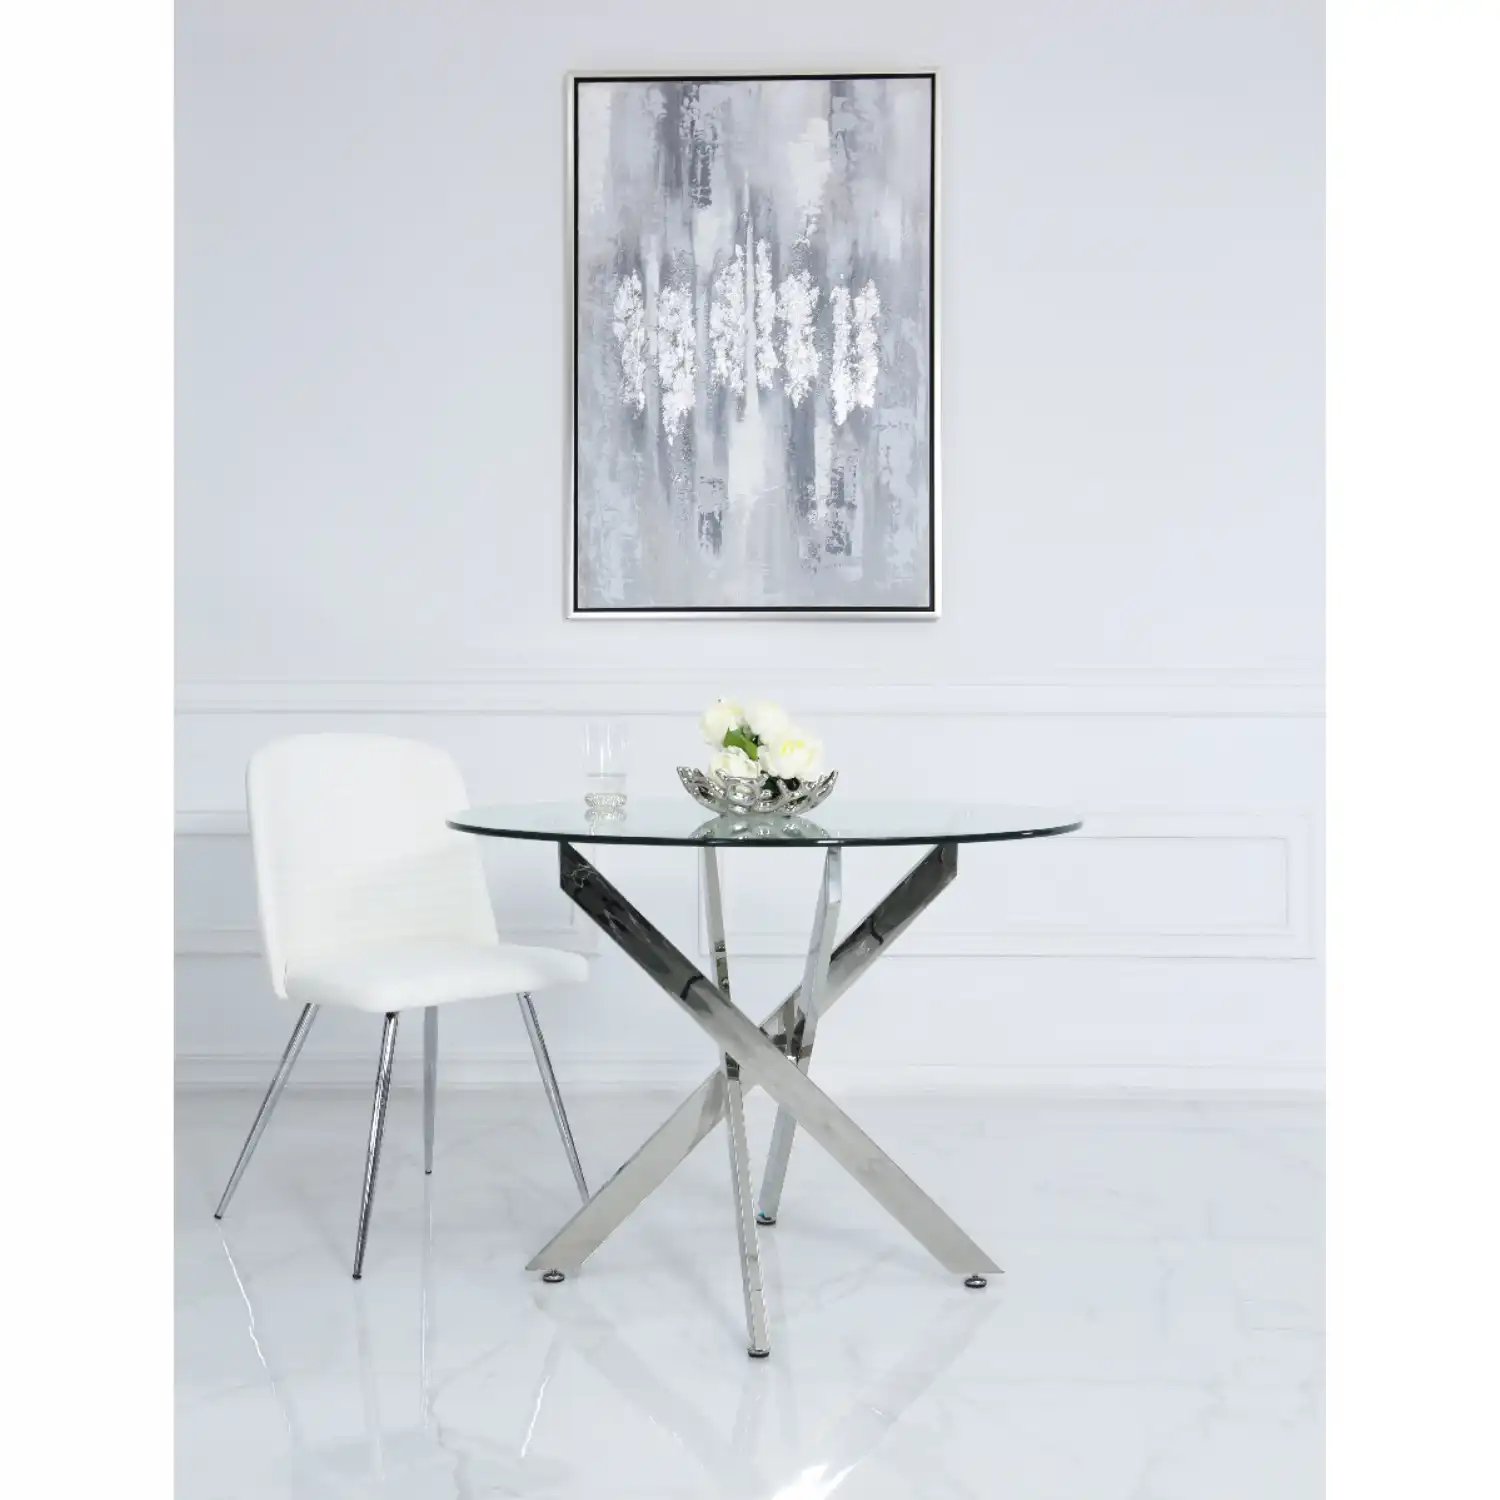 Round Chrome and Glass Dining Table 100cm Diameter